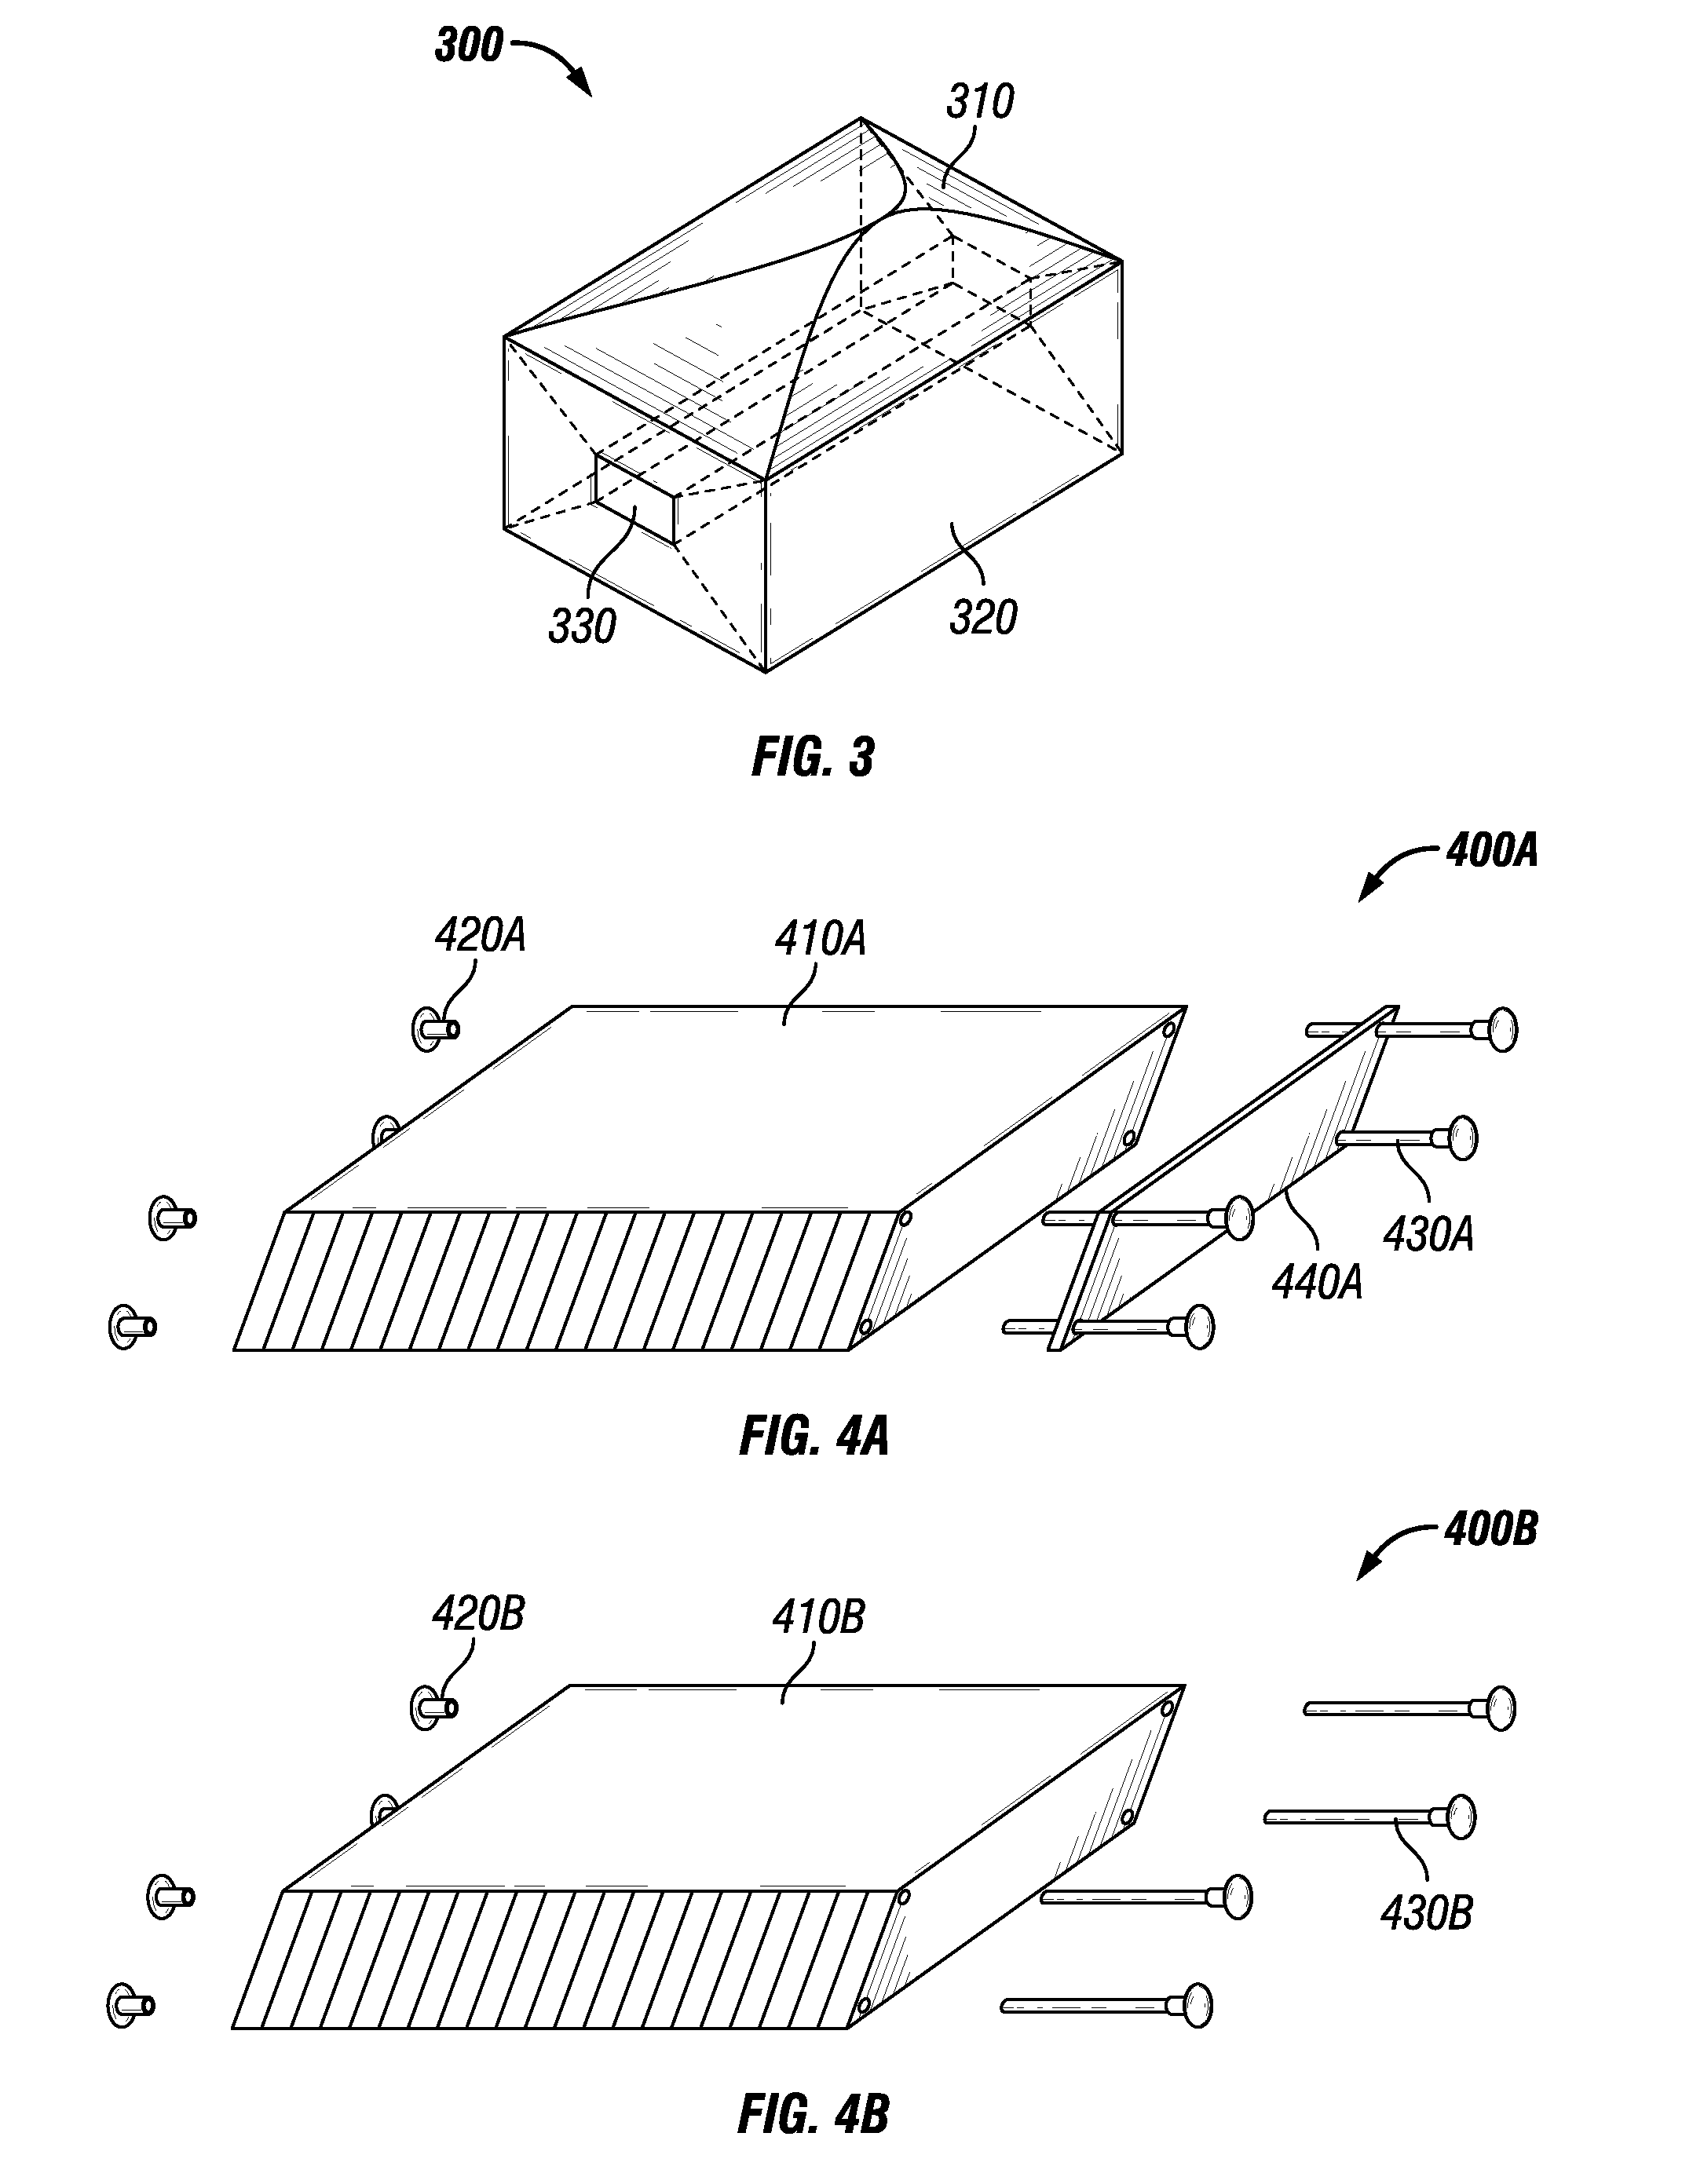 Vertically stacked photovoltaic and thermal solar cell